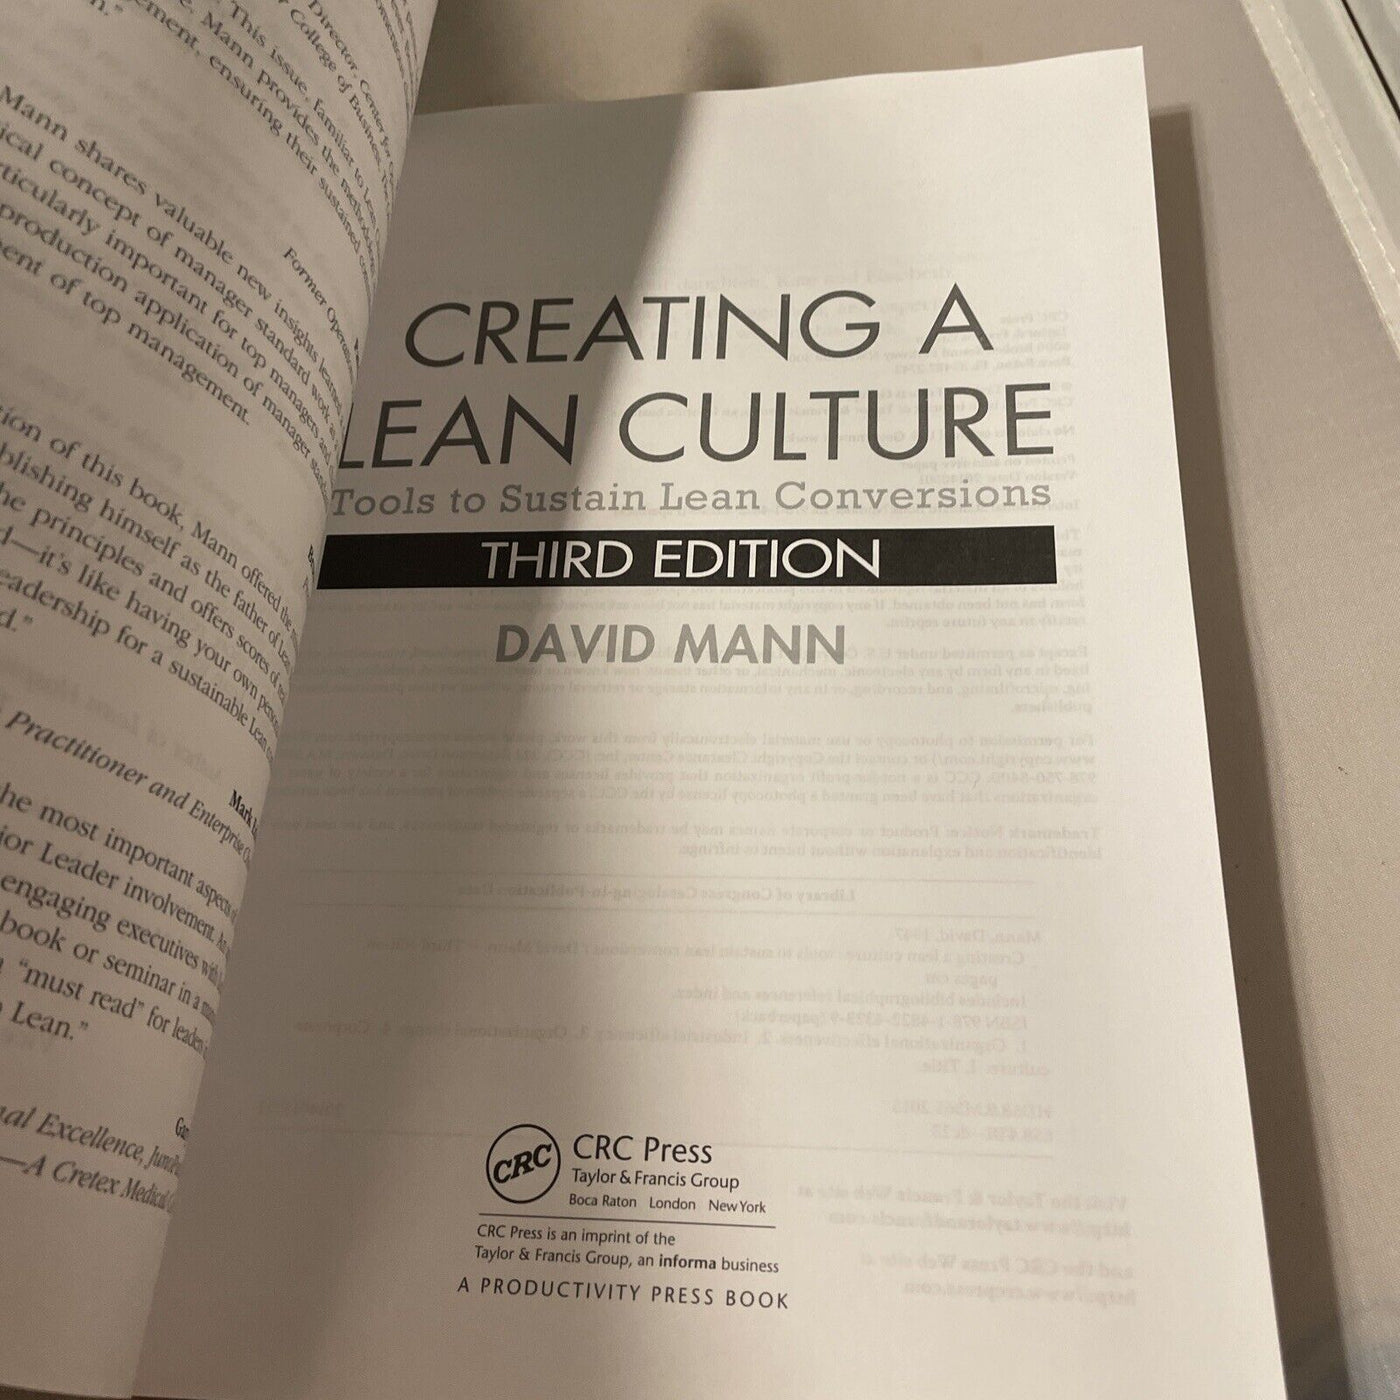 Creating a Lean Culture: Tools to Sustain Lean Conversions, Third Edition - LIKE NEW